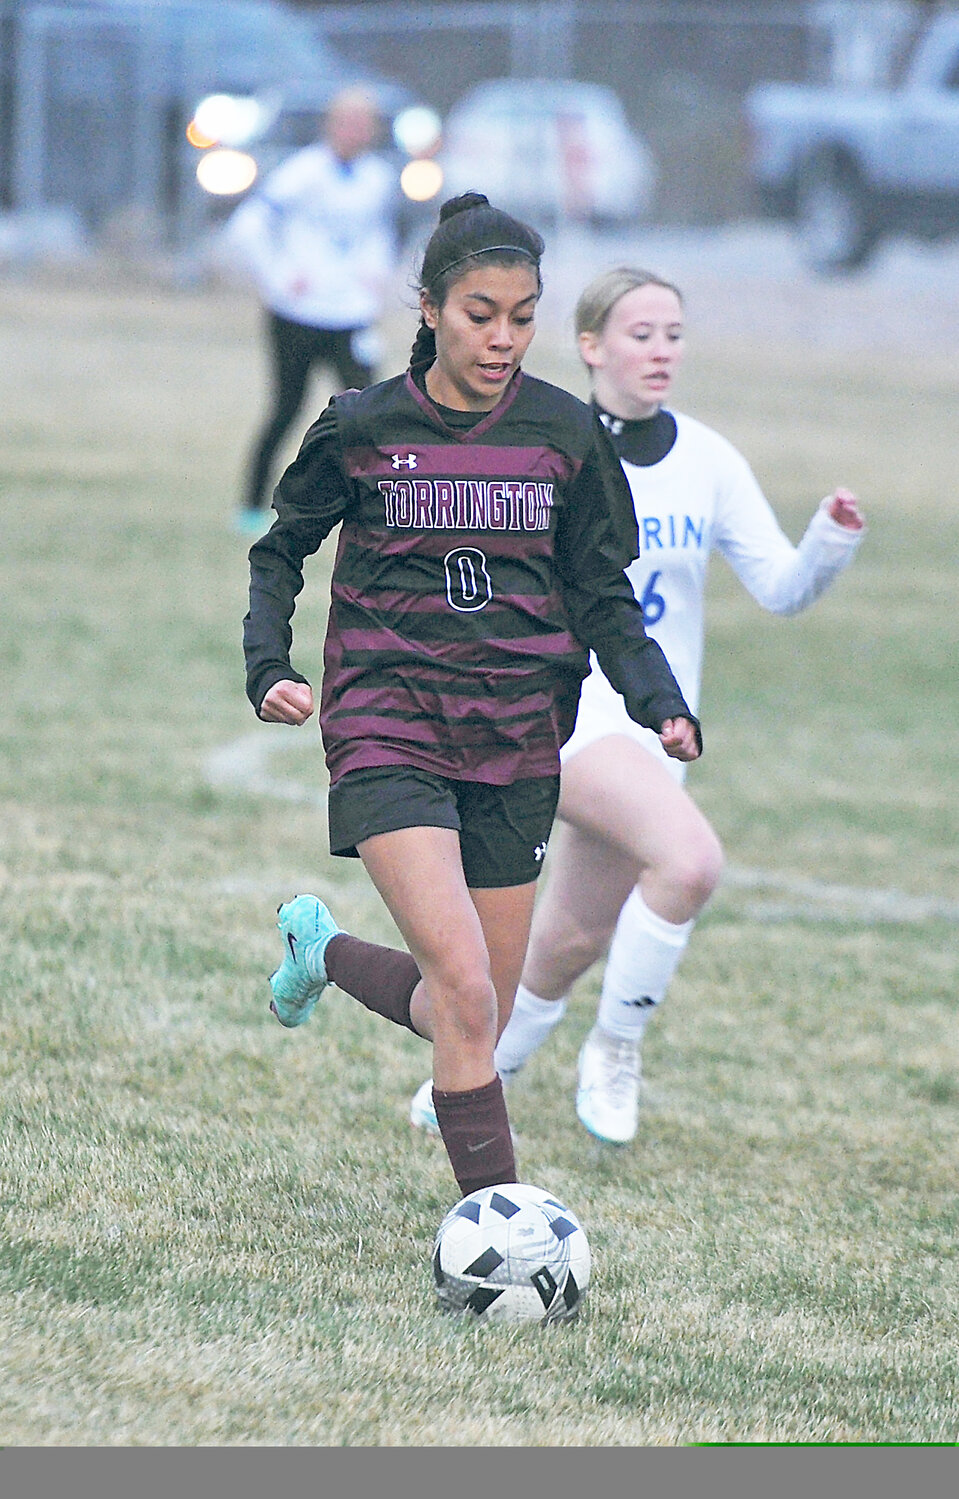 Junior Marisol Munoz maneuvers the ball into Gering’s territory in the first half of the March 26 game at Torrington’s Wiseman Field.